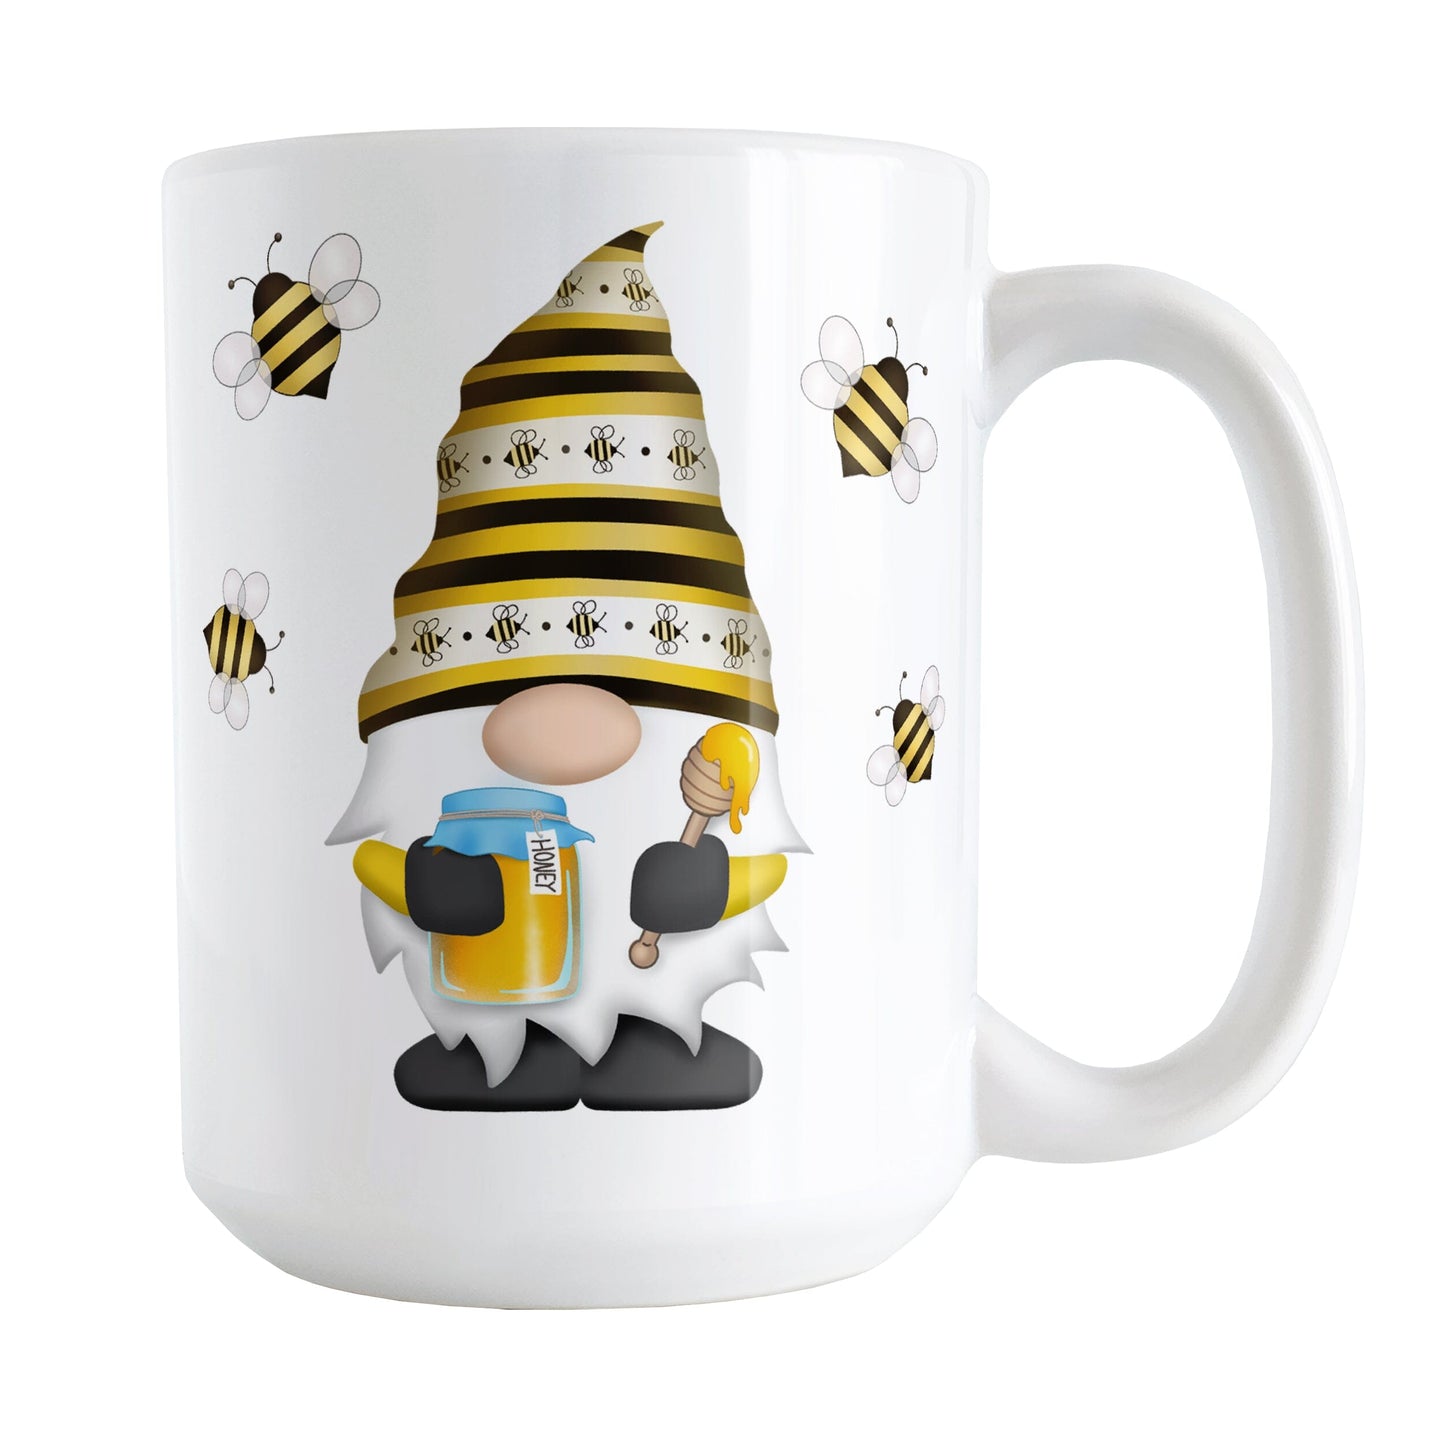 Honey Bee Gnome Mug (15oz) at Amy's Coffee Mugs. A ceramic coffee mug designed with a gnome wearing an adorable hat with black and yellow stripes and bees, holding a jar of honey and a honey dipper, with bees flying around the gnome. This cute honey bee gnome illustration is on both sides of the mug. 